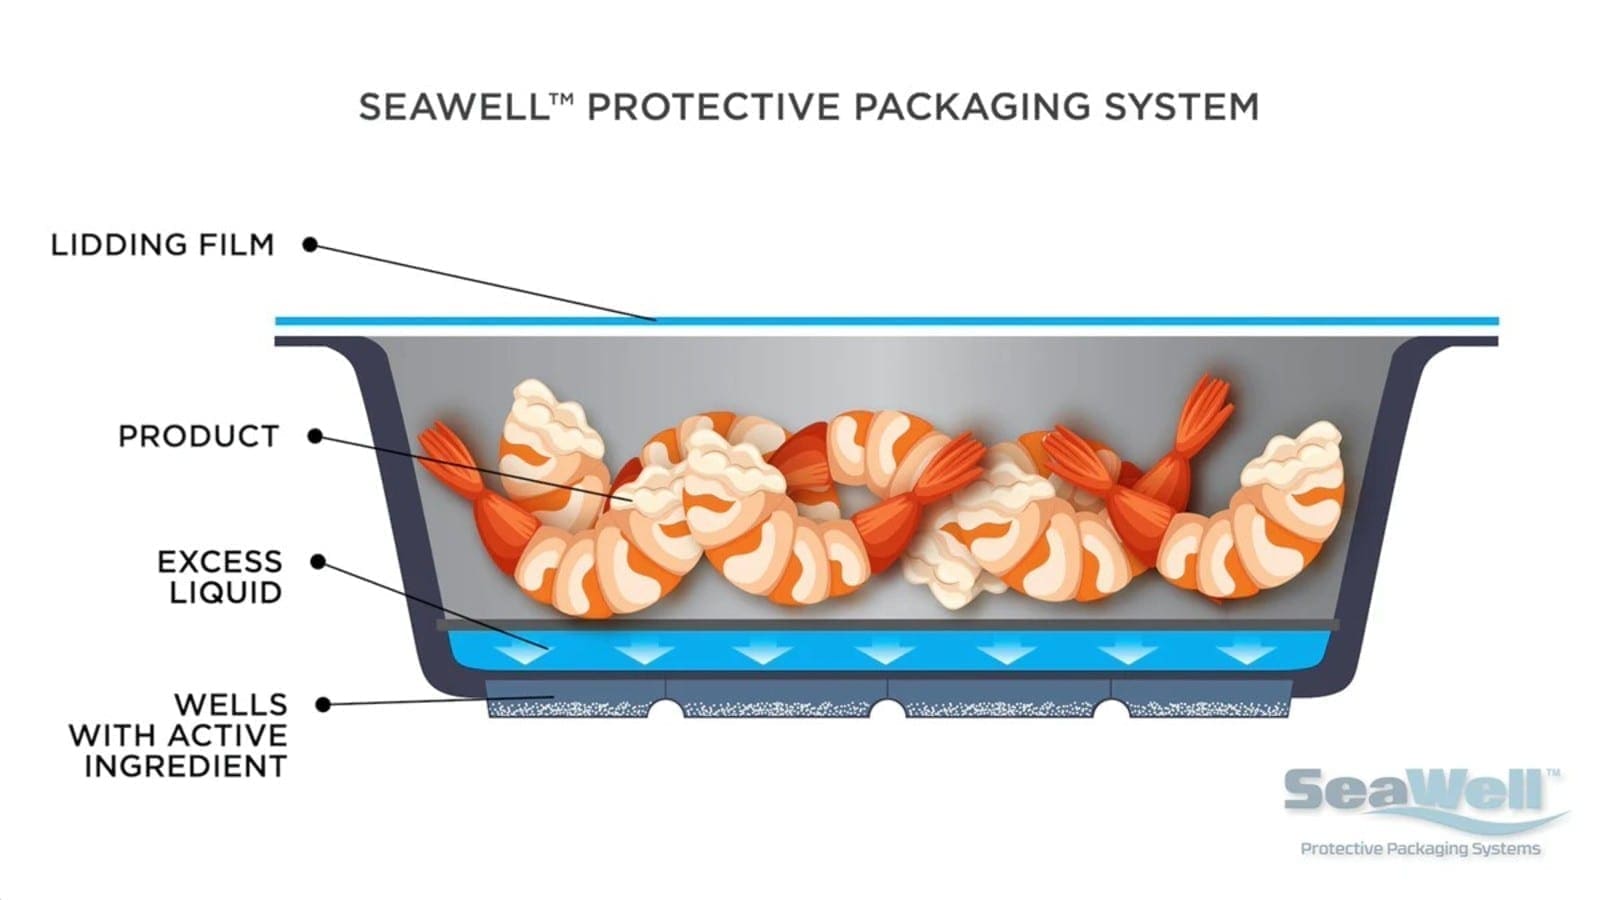 Virginia Tech’s study affirms  ability of  SeaWell Protective Packaging System in maintaining seafood quality